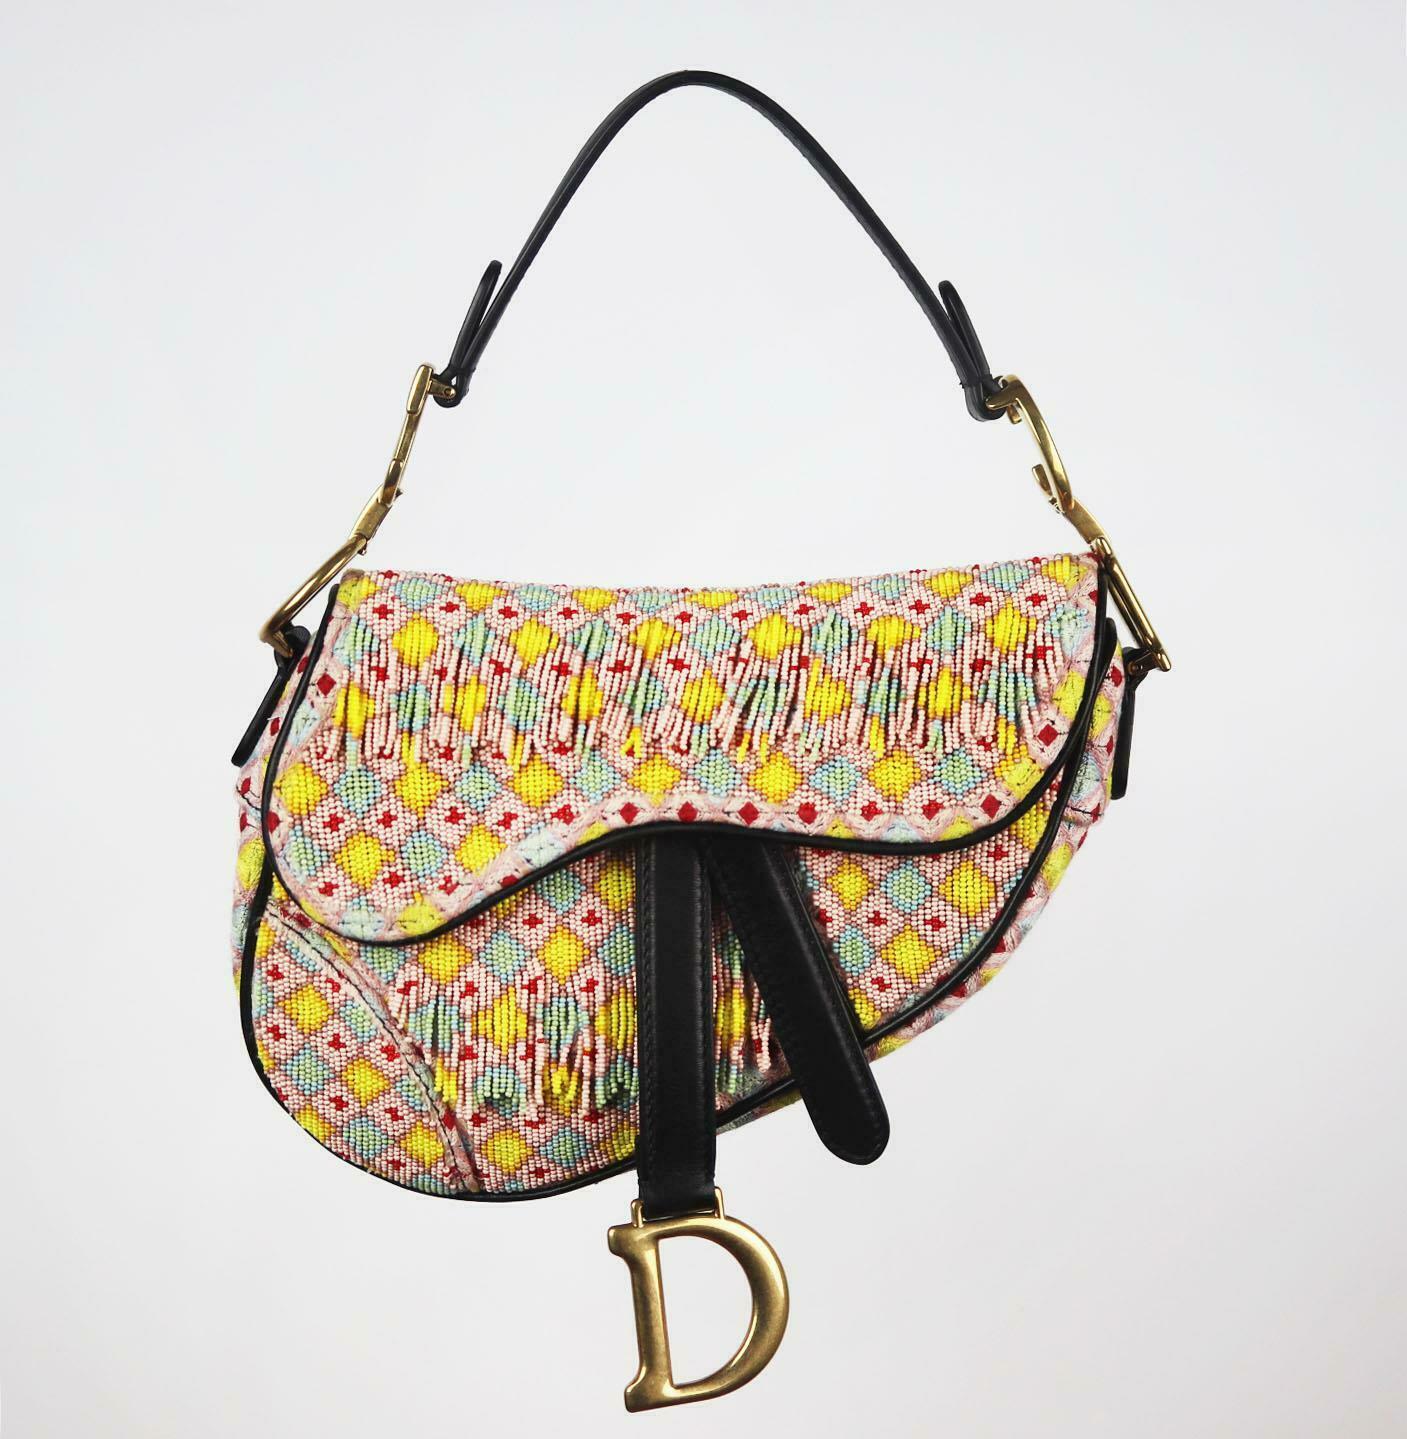 Made in Italy, this beautiful Christian Dior 'Saddle' handbag has been made from multicoloured fringed beaded embellishment and black calfskin exterior with matching black suede interior, this piece is decorated with Dior's gold finish hardware on